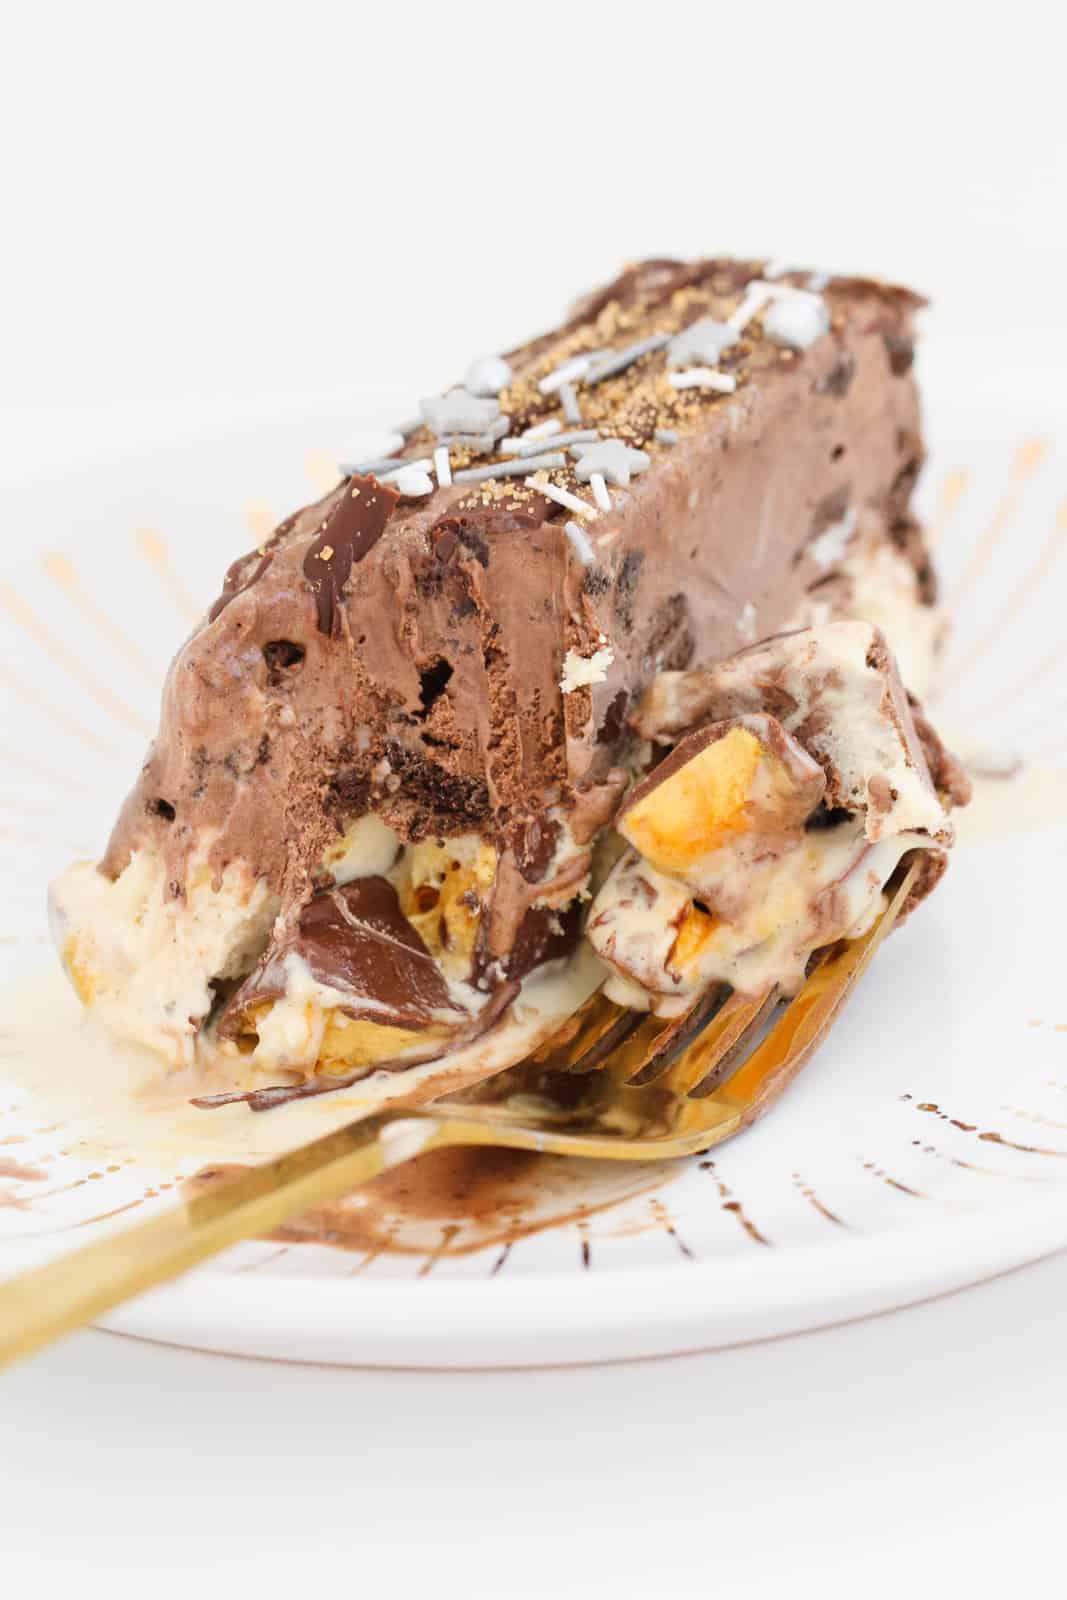 Chunks of honeycomb on a fork in front of a slice of chocolate ice-cream cake.